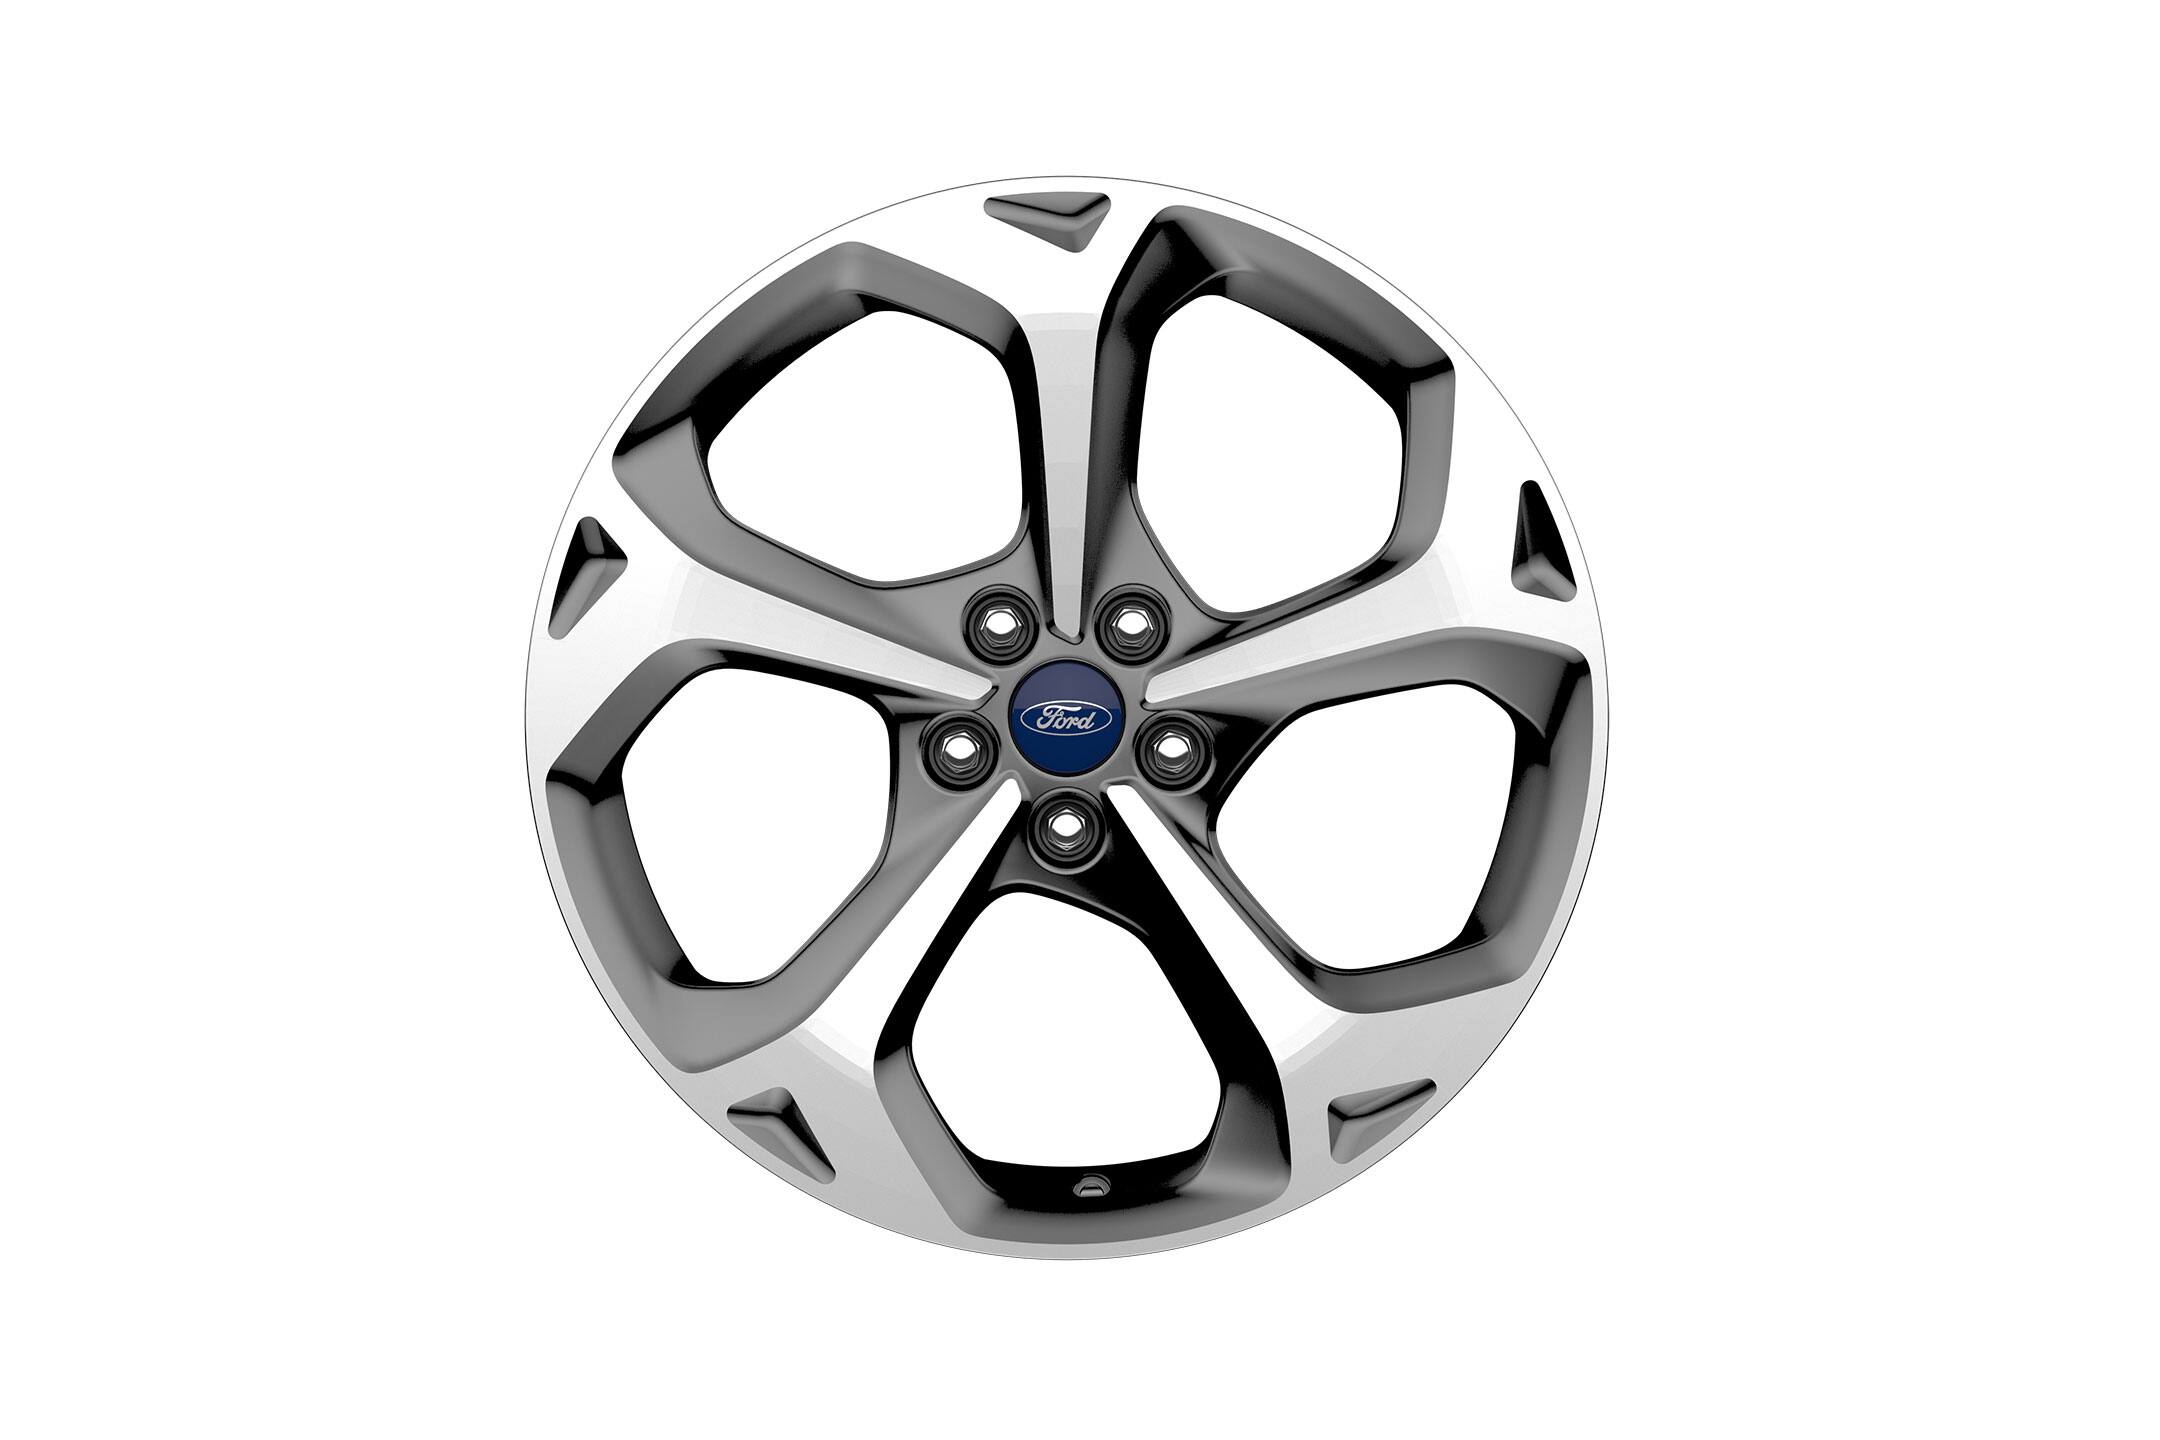 18" Rock Metallic-Painted-Aluminum Wheels standard on ST-Line and ST-Line Select